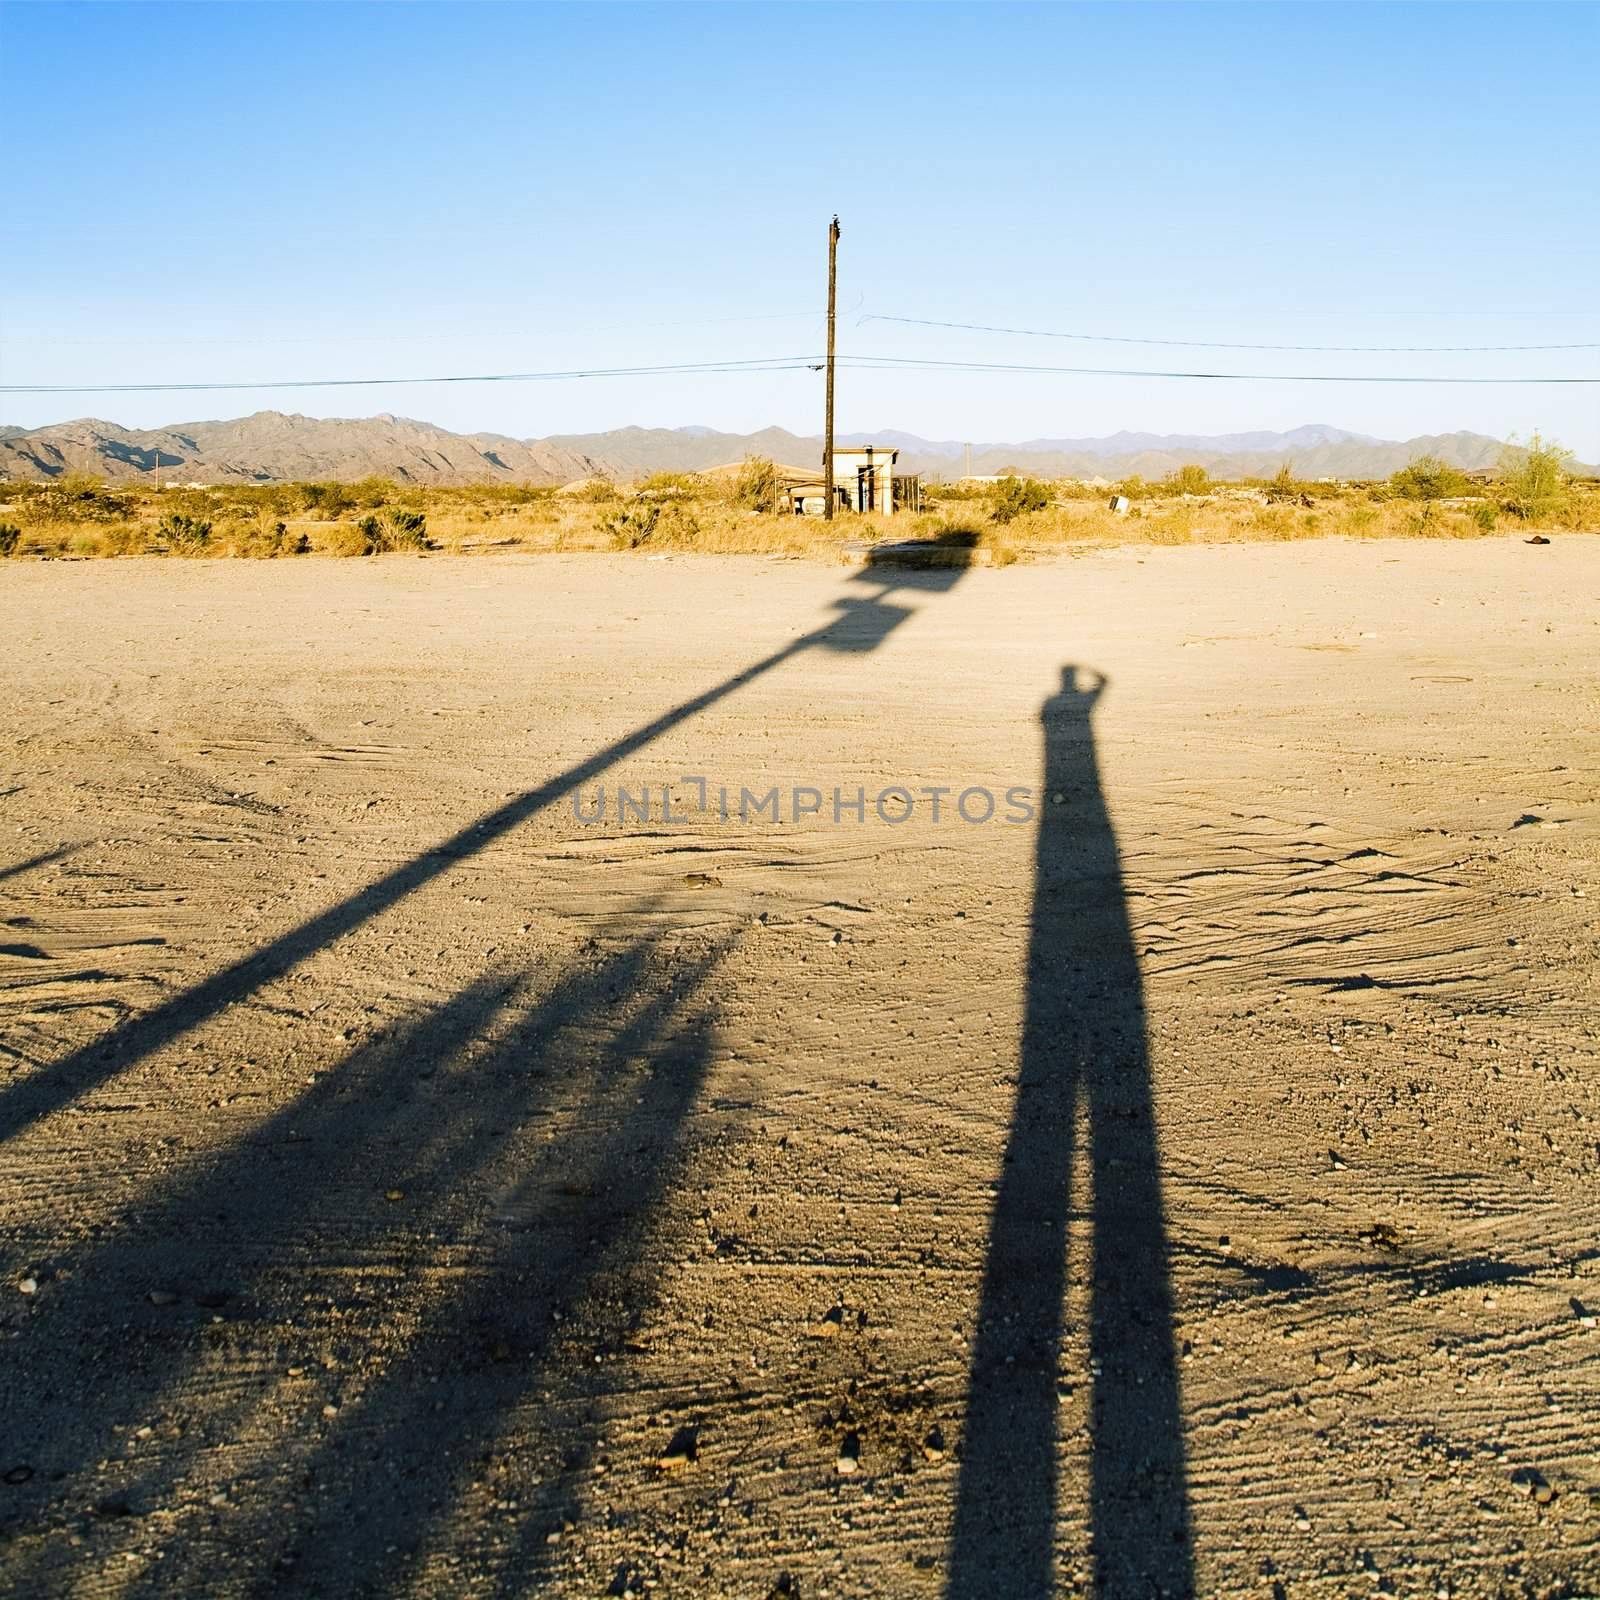 Landscape with long shadow of man and desert in the background.